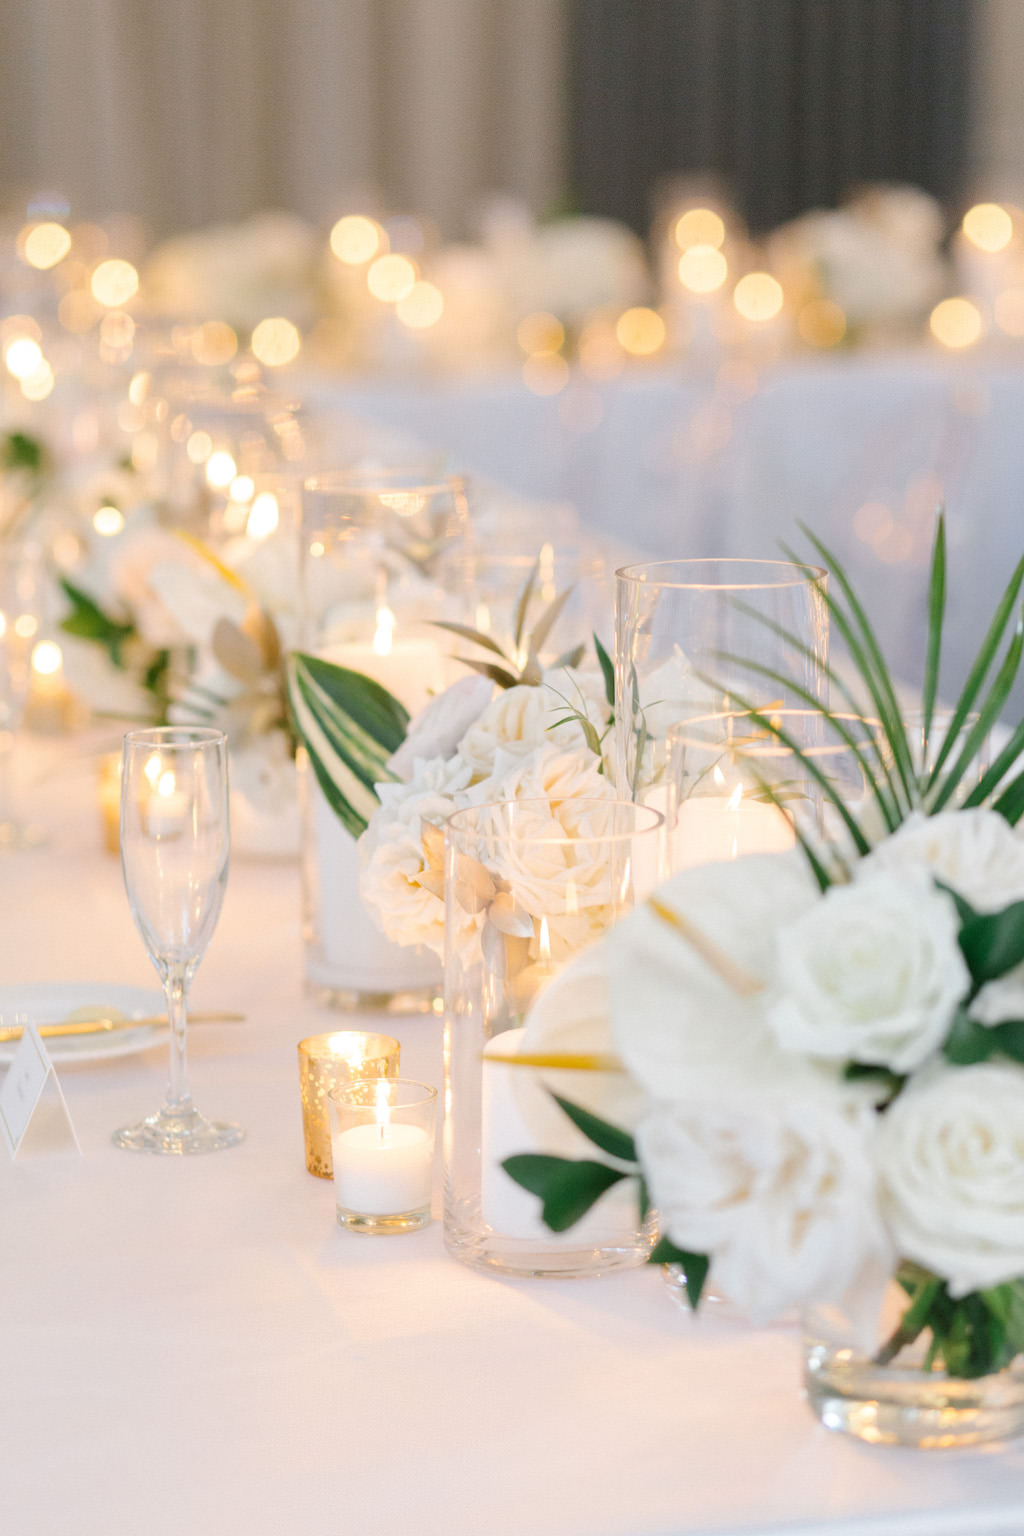 Elegant Modern Wedding Reception Decor, Long Feasting Table with White Linen, White and Tropical Leaf Small Centerpiece Floral Arrangements and Candles | Tampa Bay Wedding Florist Bruce Wayne Florals | Wedding Planner Parties A'La Carte